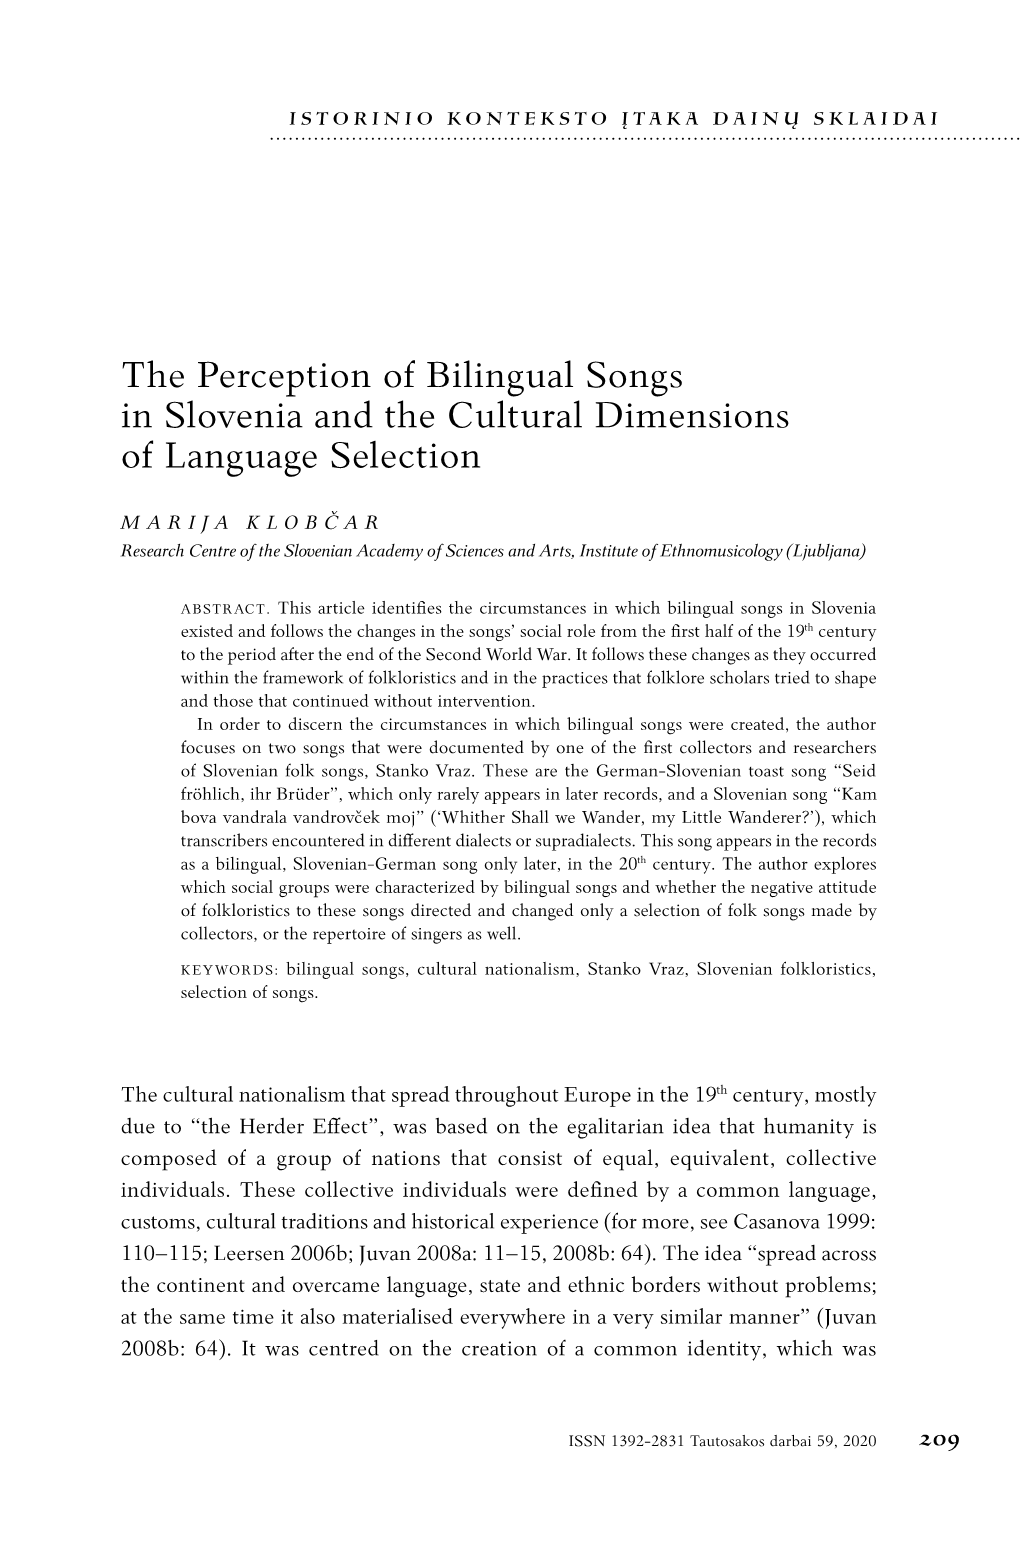 The Perception of Bilingual Songs in Slovenia and the Cultural Dimensions of Language Selection